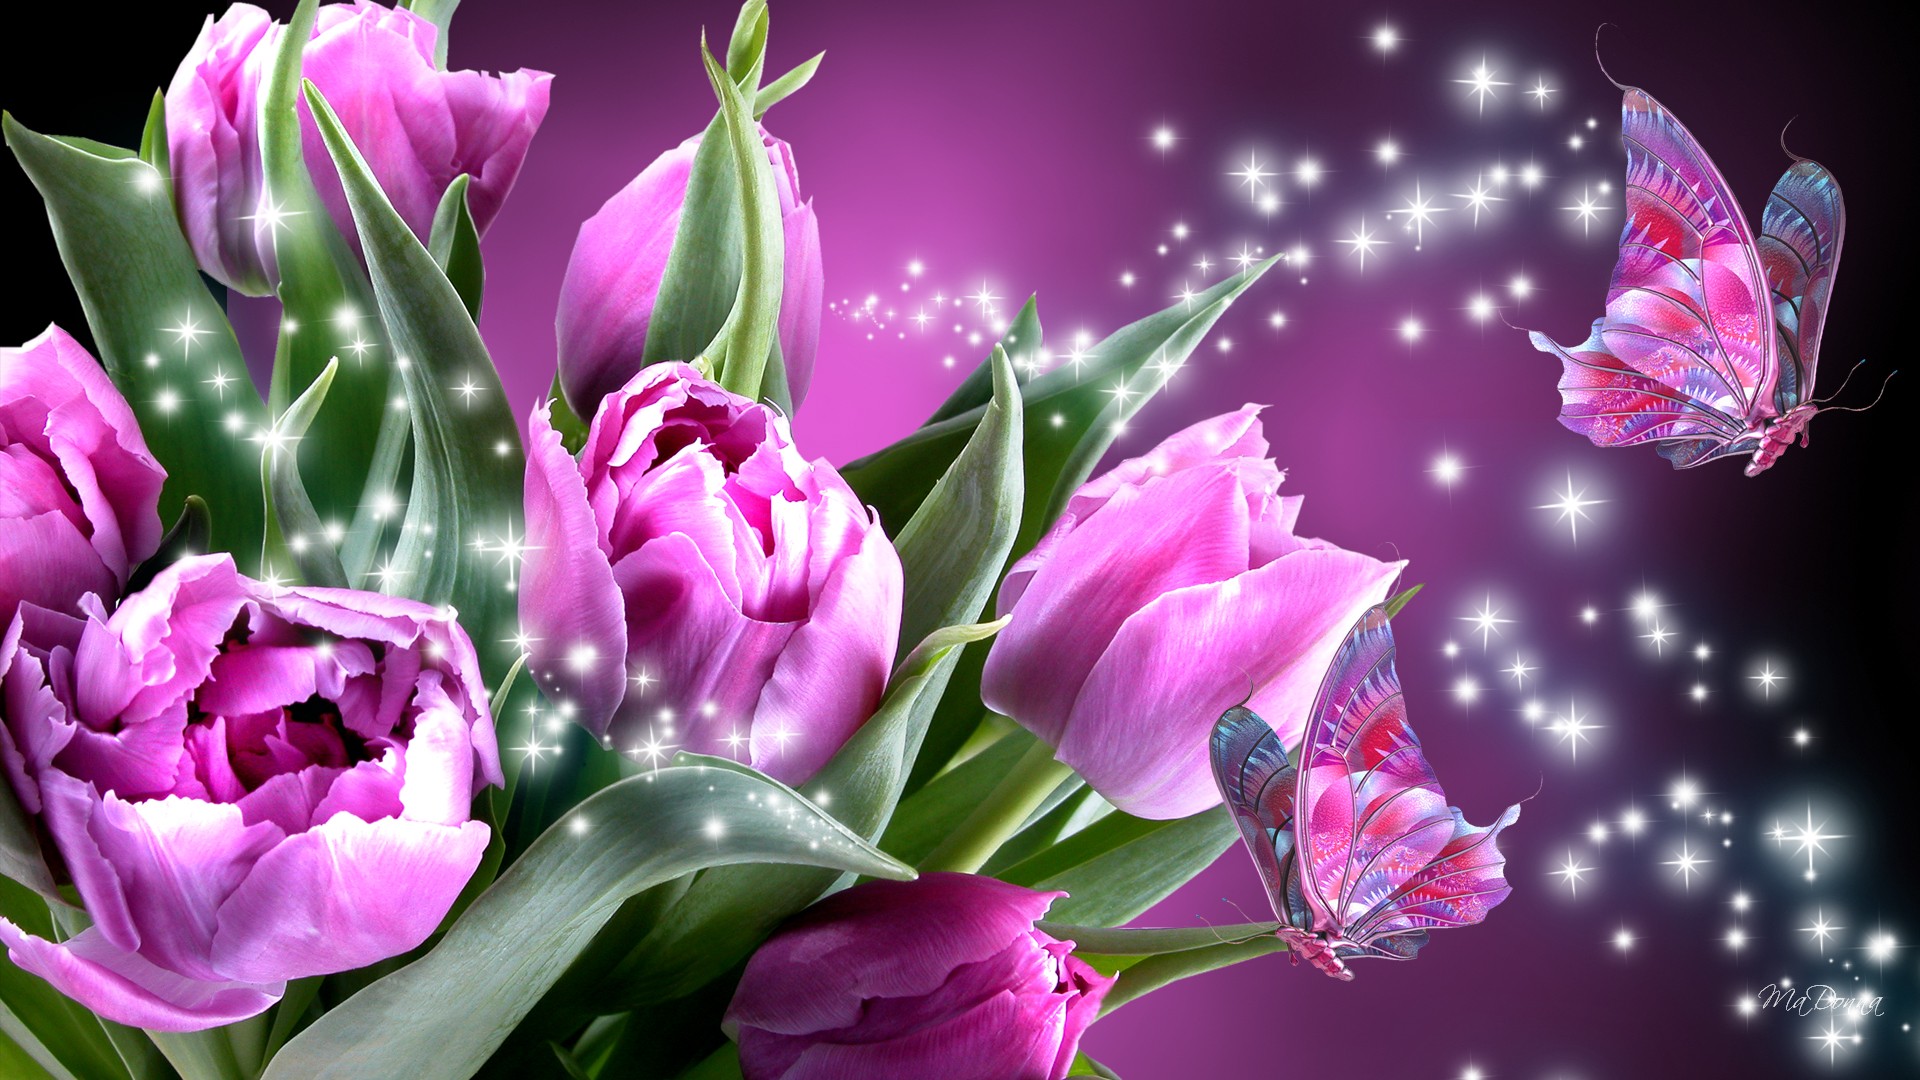 Pink And Purple Butterfly Wallpaper 2014 amazing p